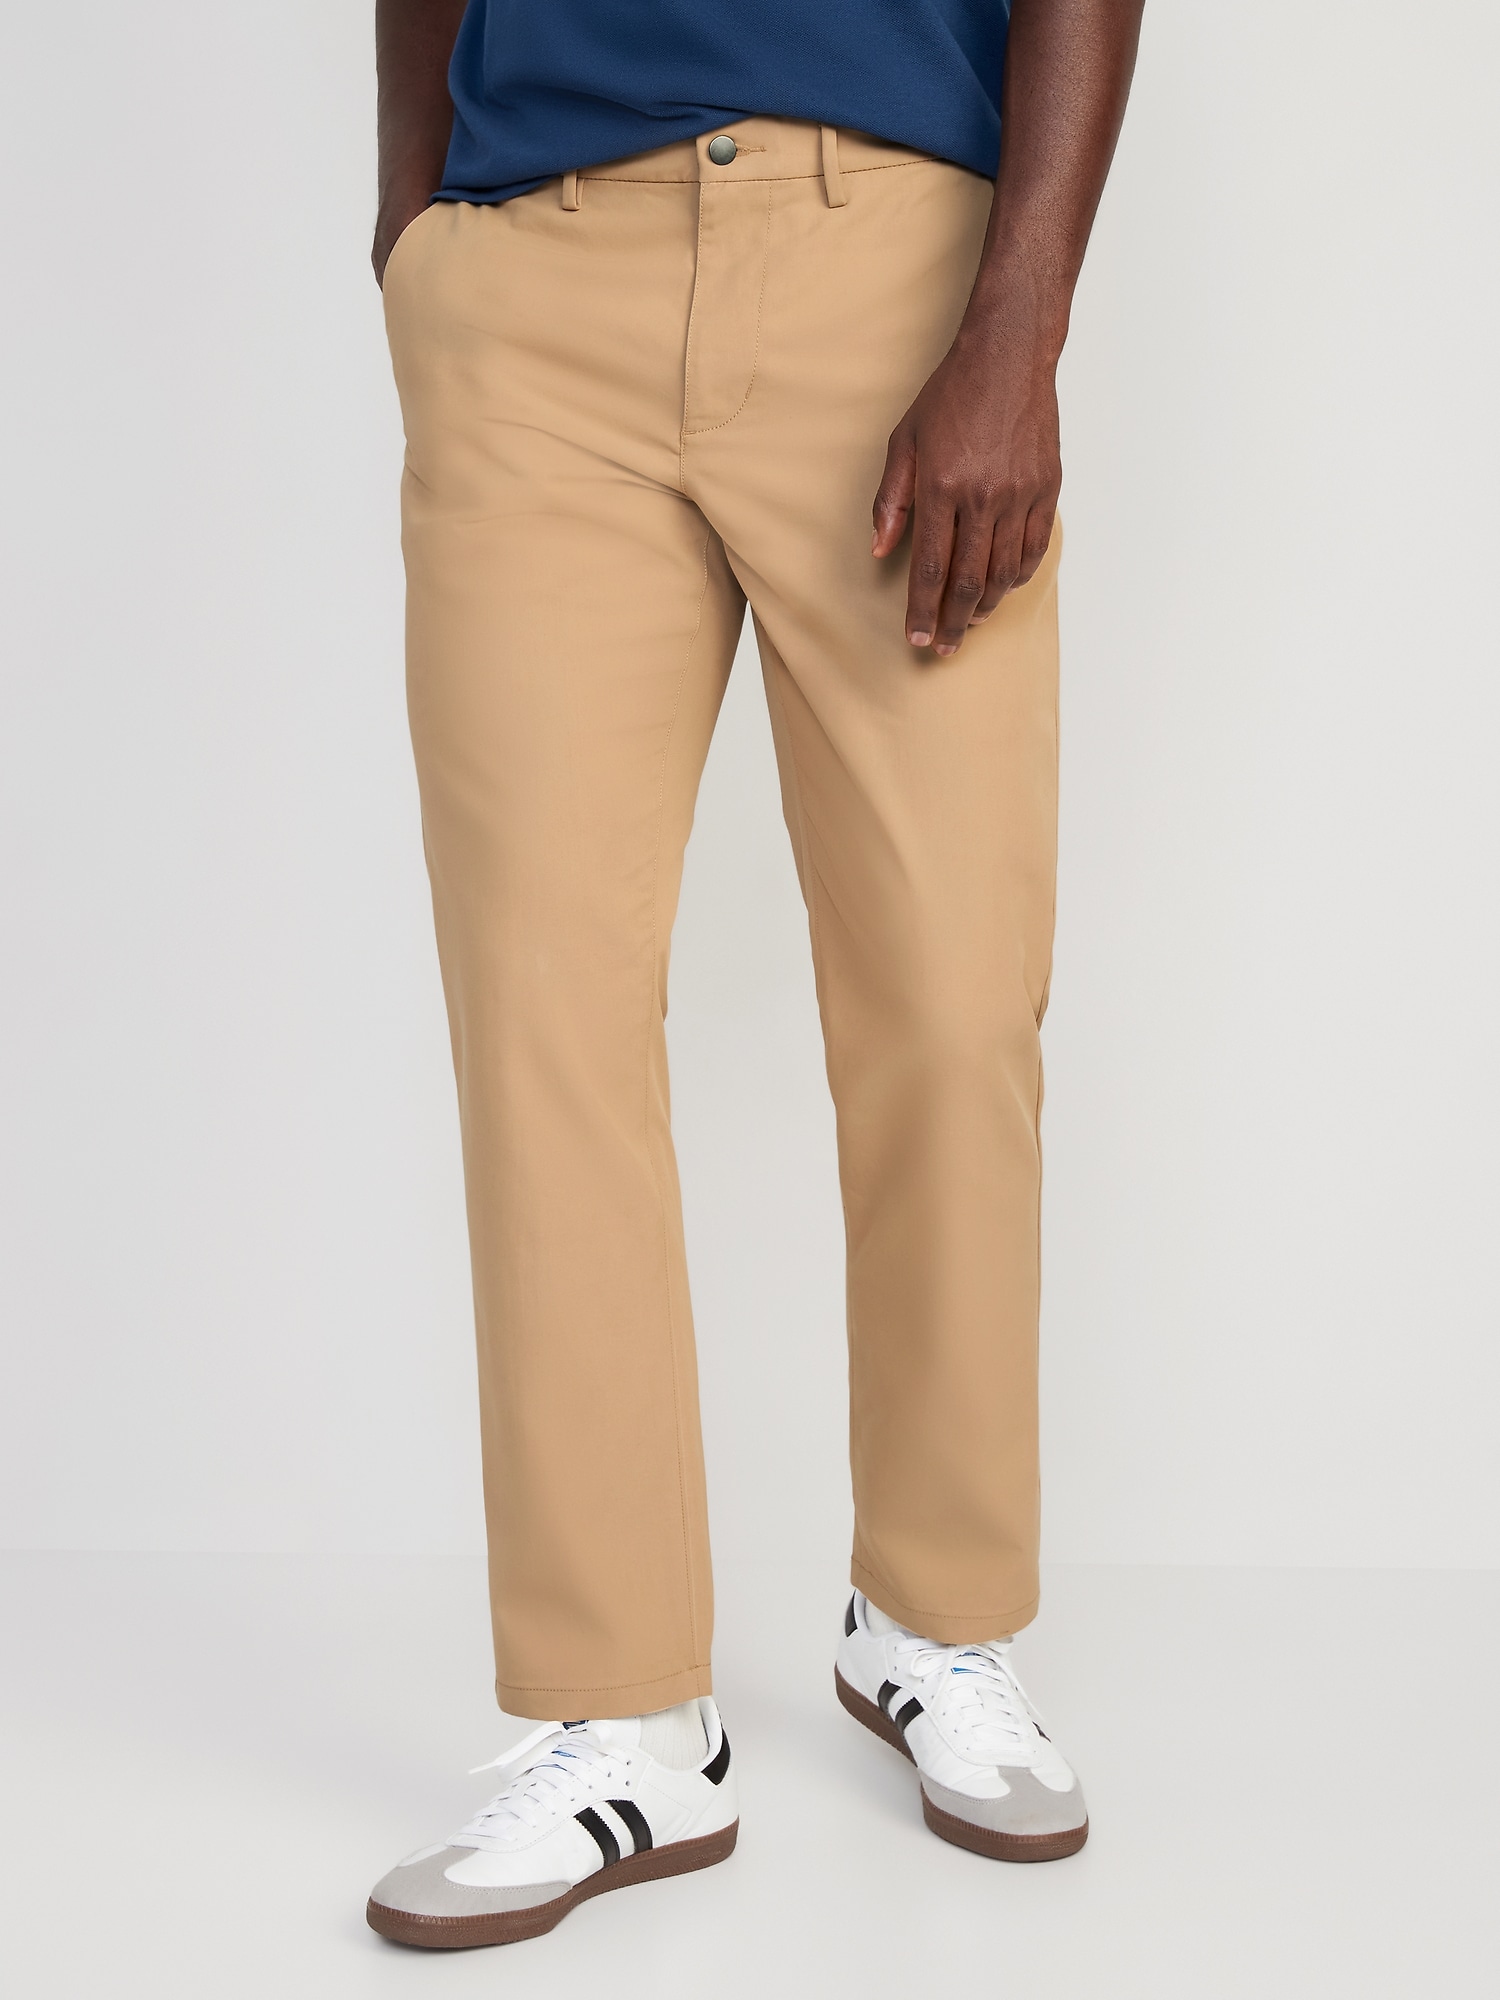 In Review: The Old Navy Slim Built-In Flex Dry Quick Ultimate Khakis